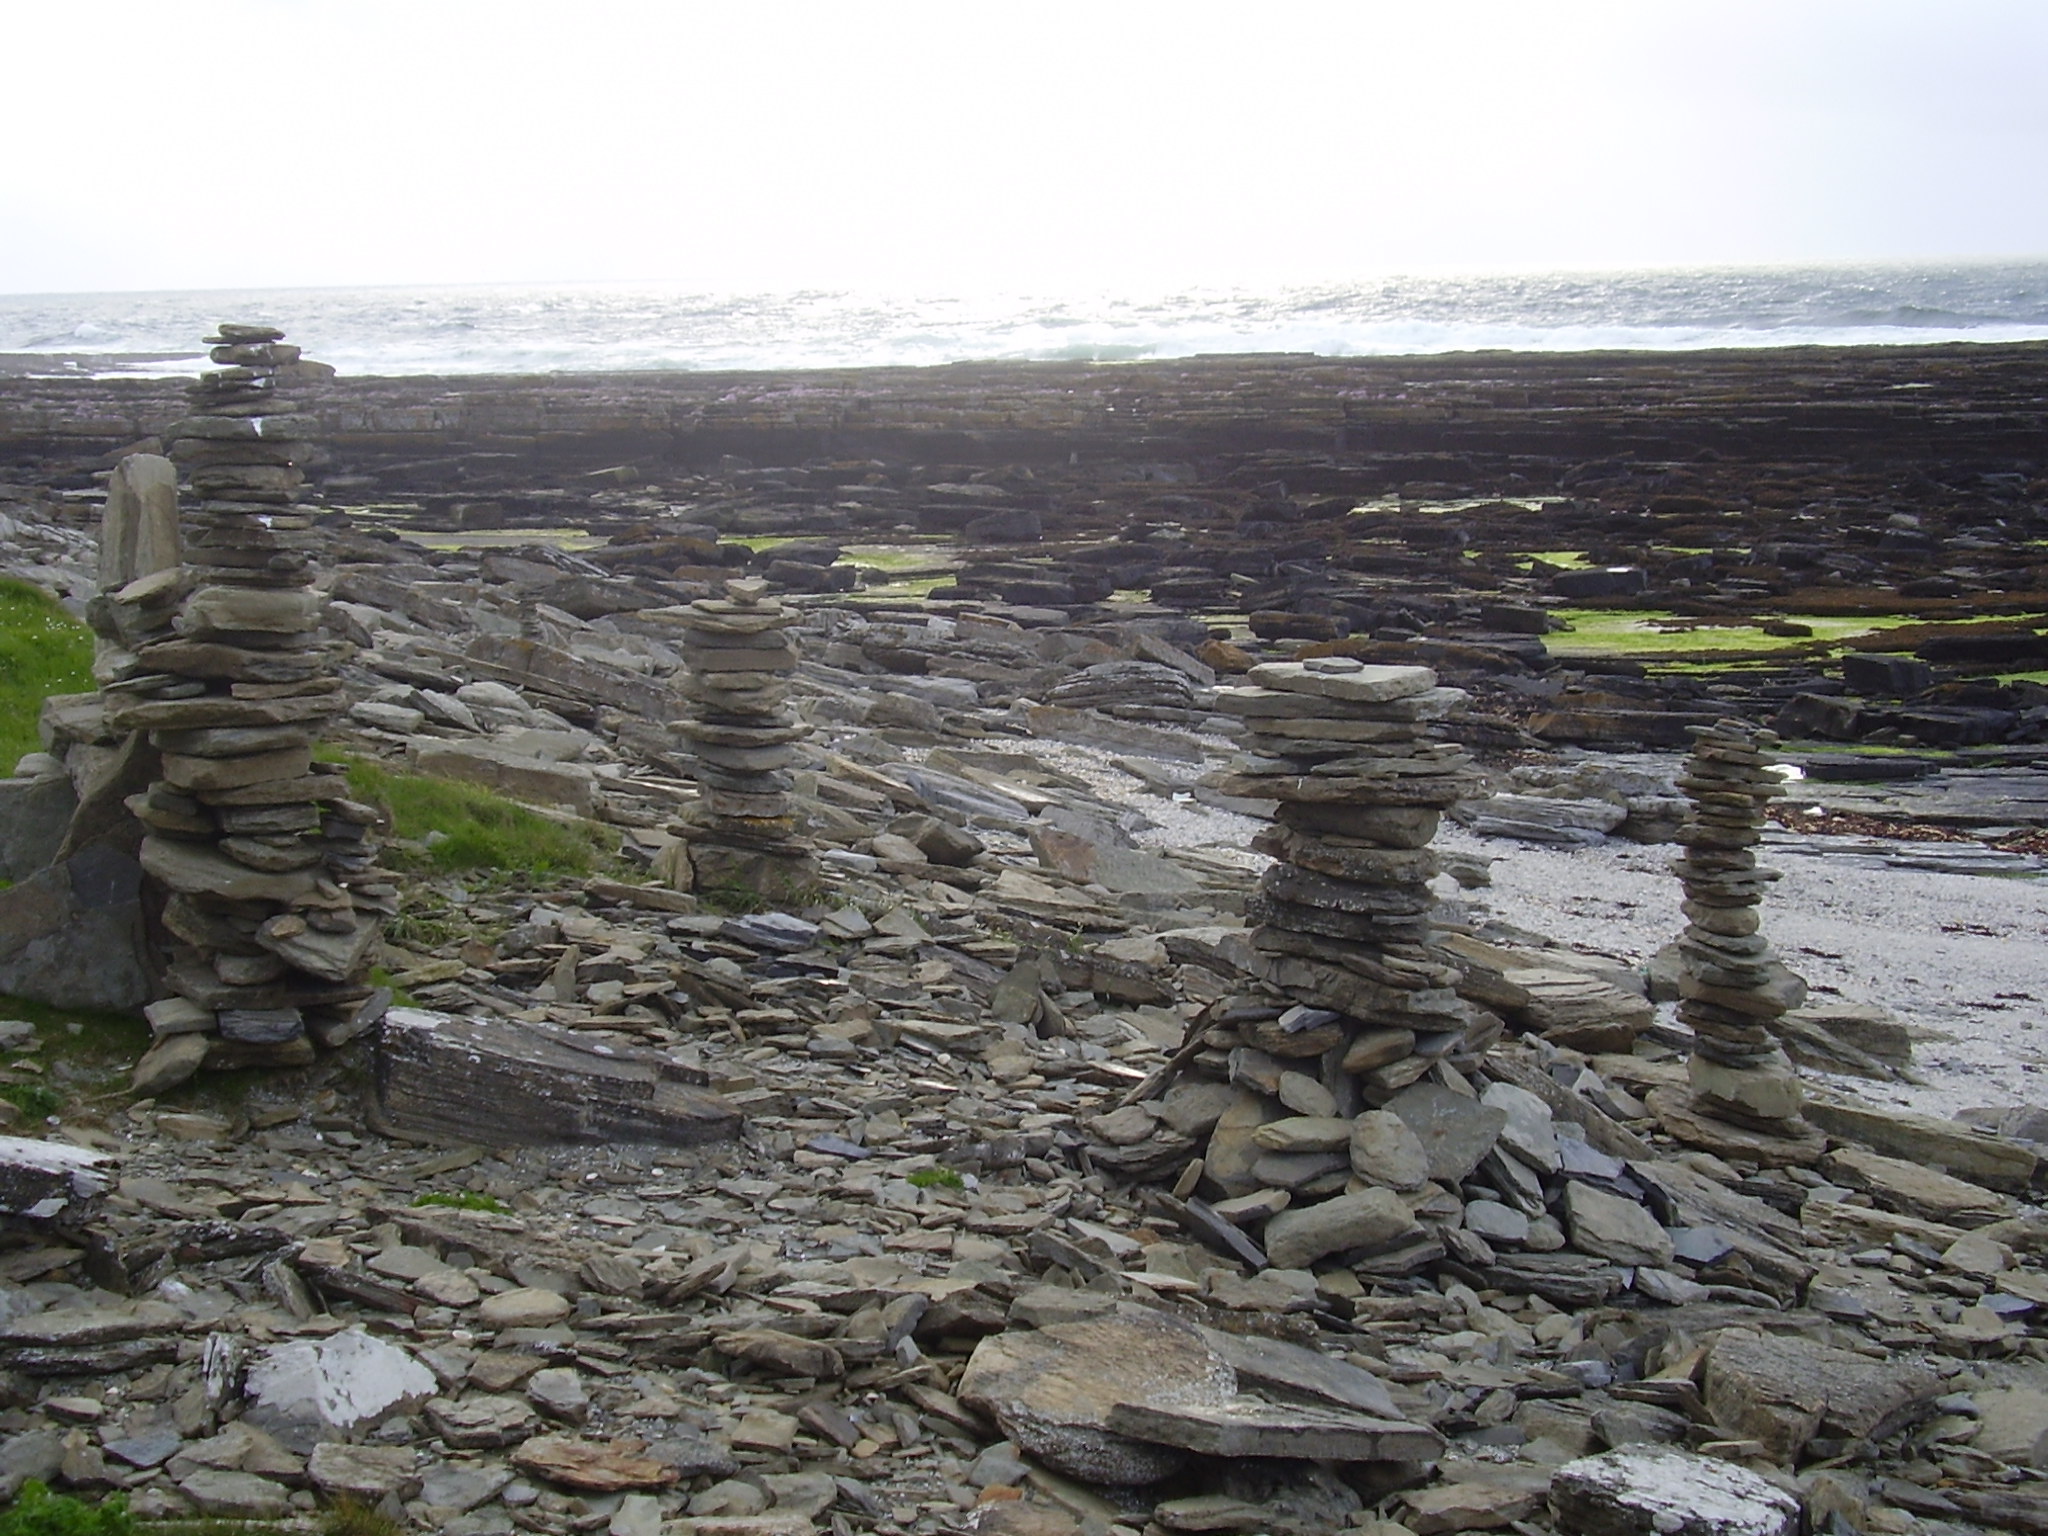 Cairns on Brims Ness